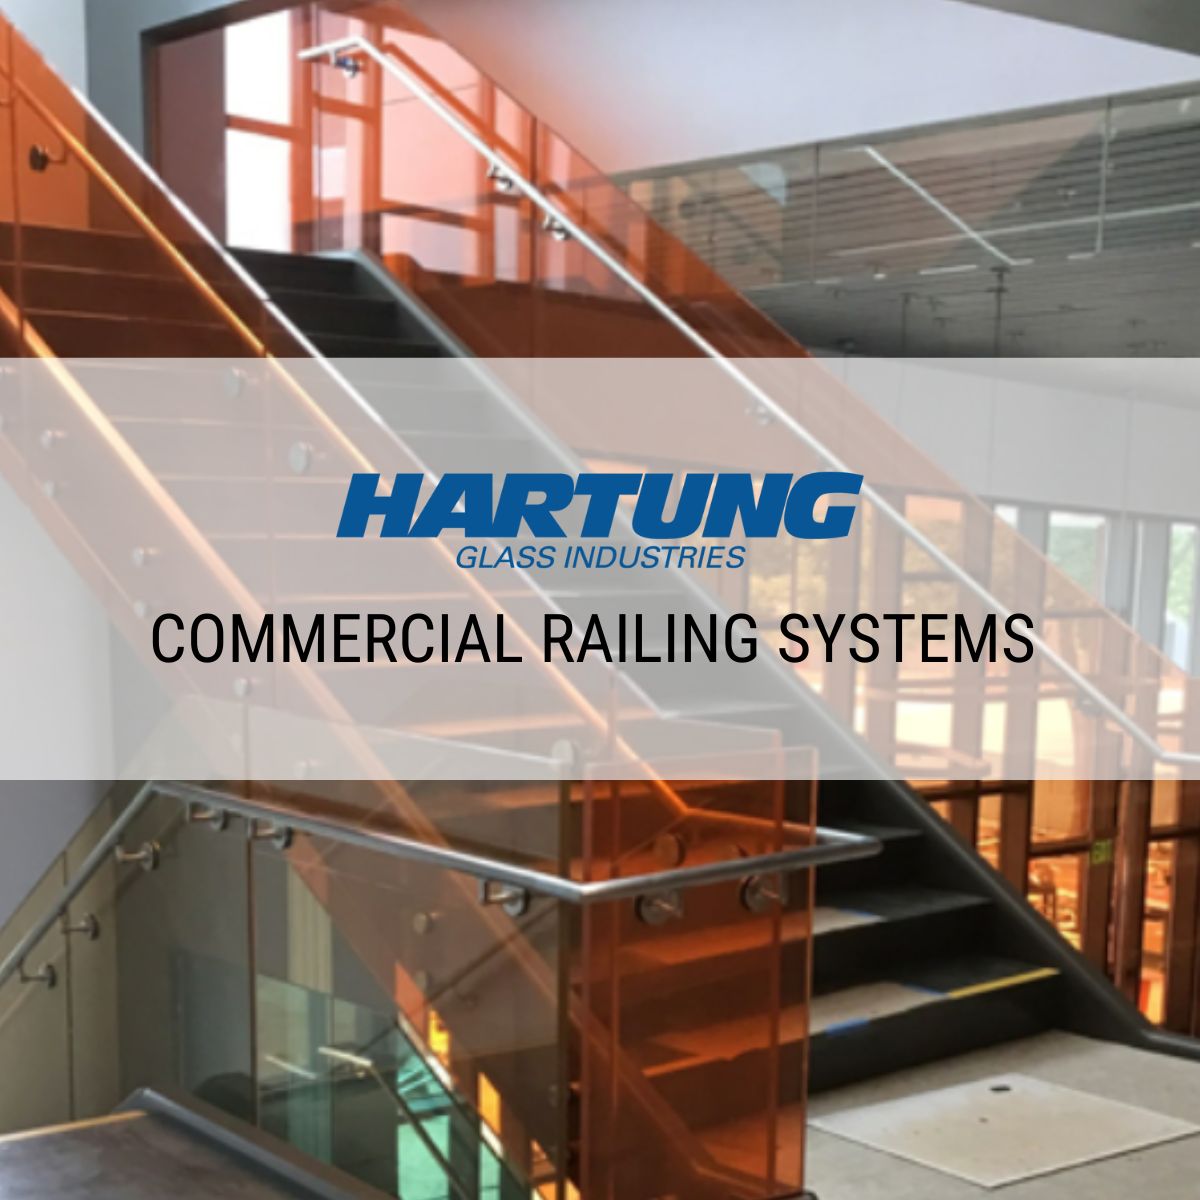 Hartung Glass Industries Commercial Railing Systems